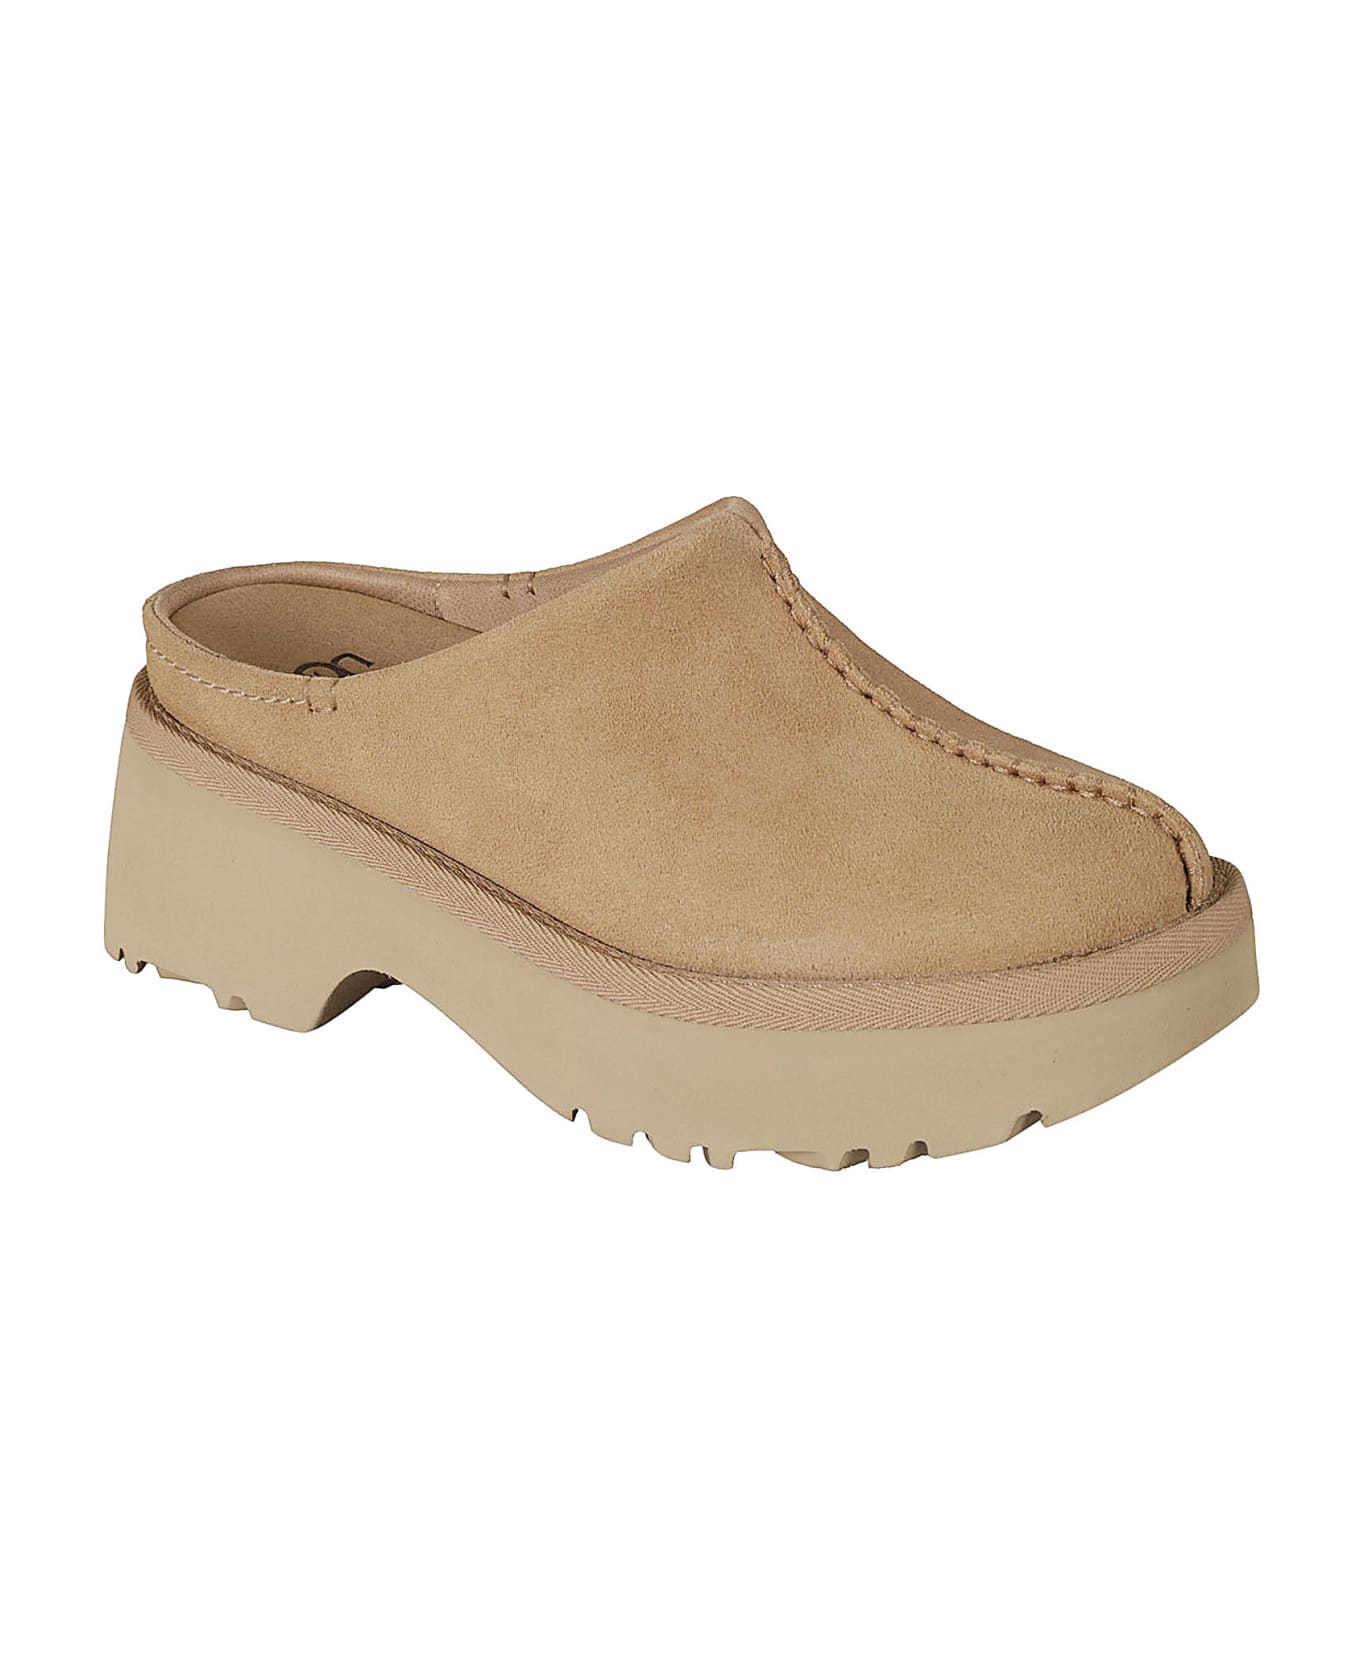 UGG New Heights Clogs - SAND